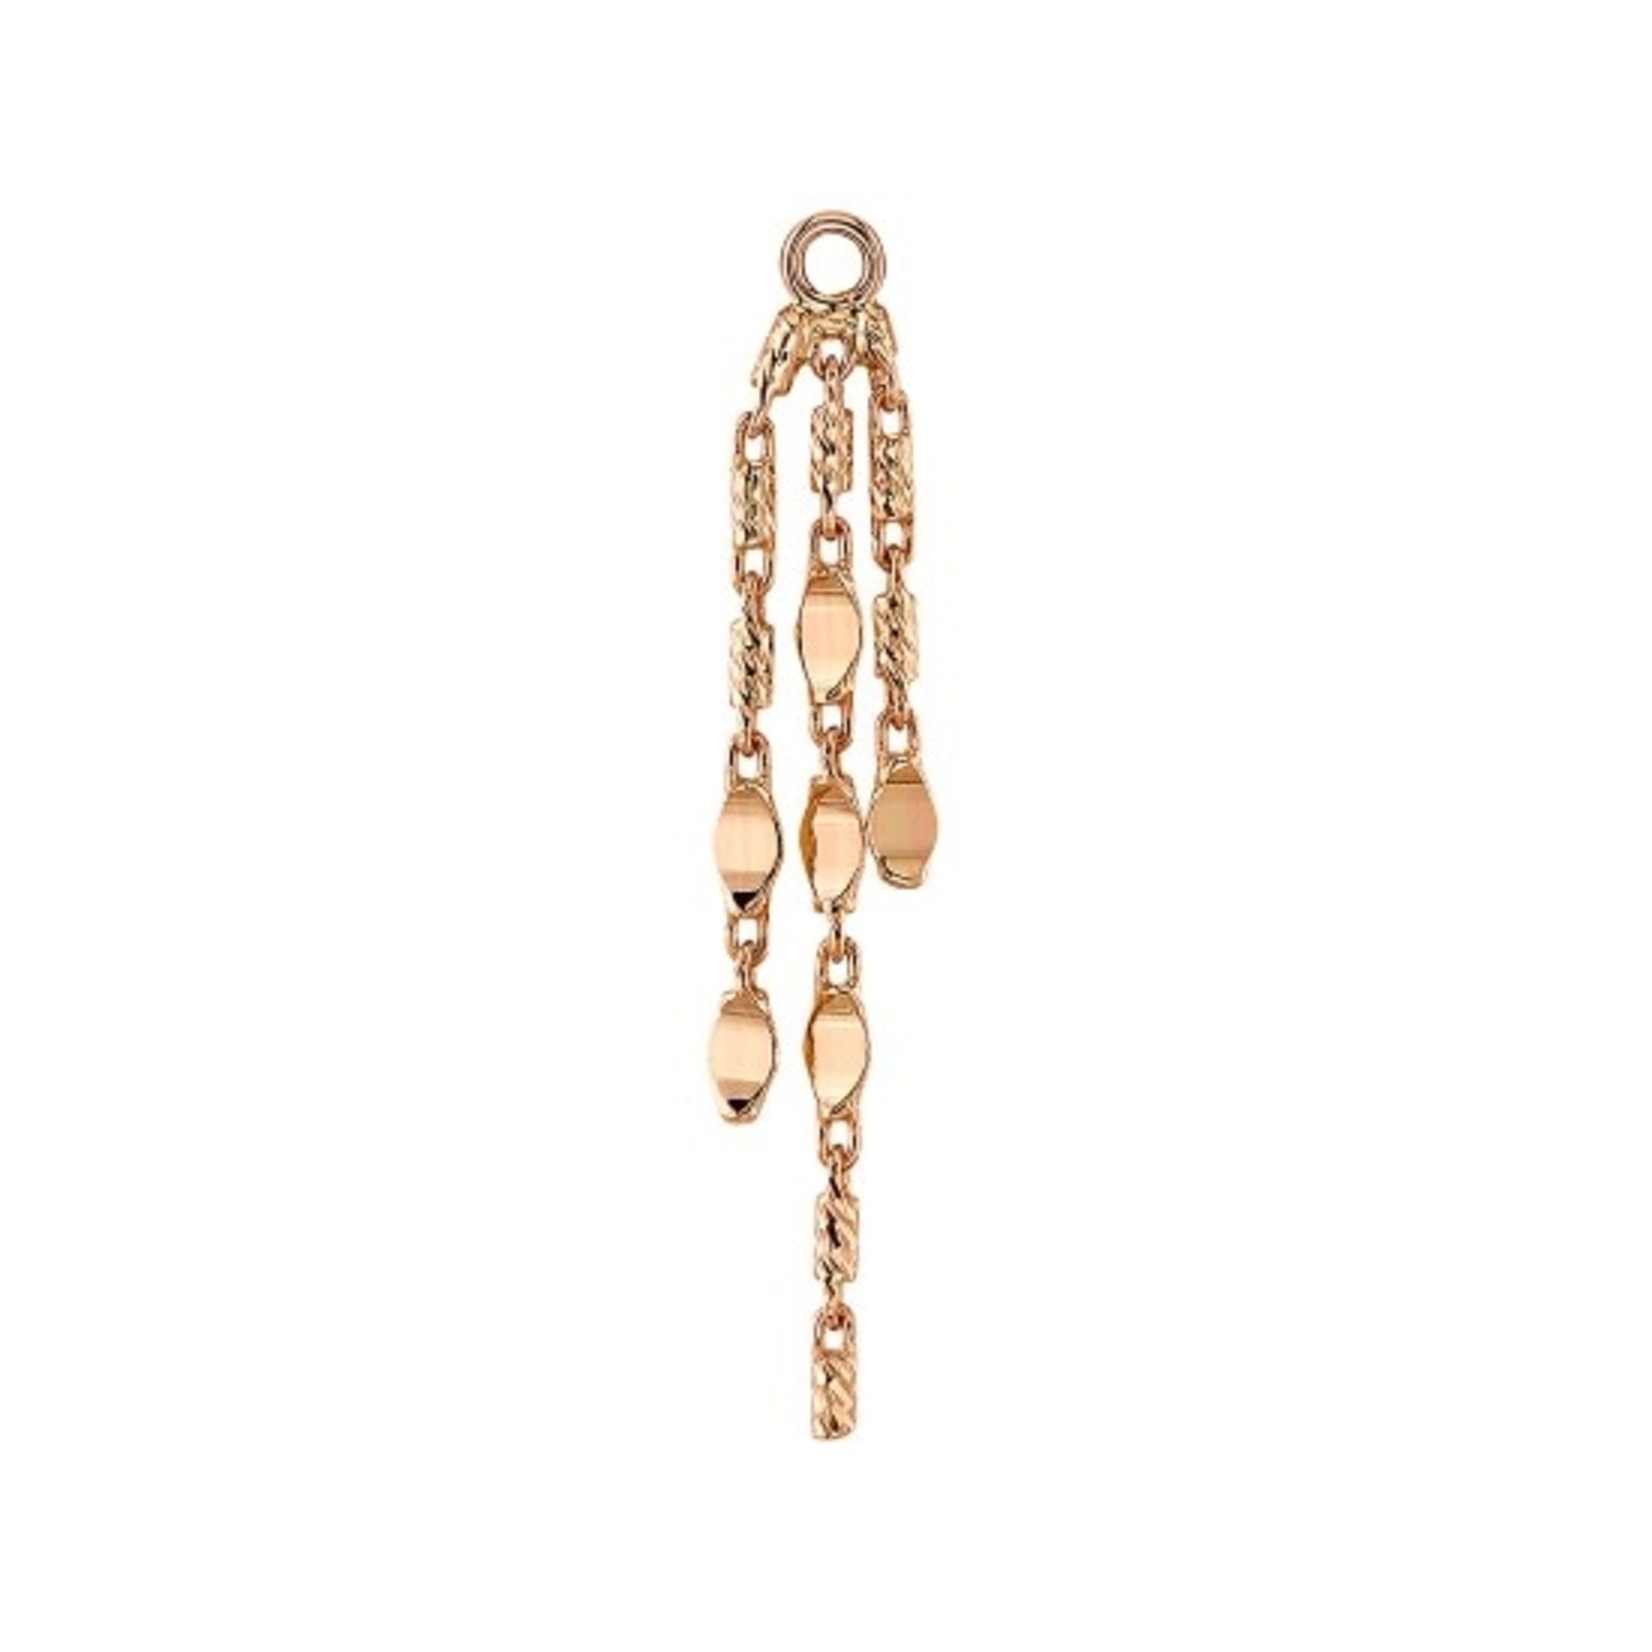 BVLA BVLA "Portia" charm with 1/2, 3/4, and 1" lengths of chain. Fitted to 16g jump rings